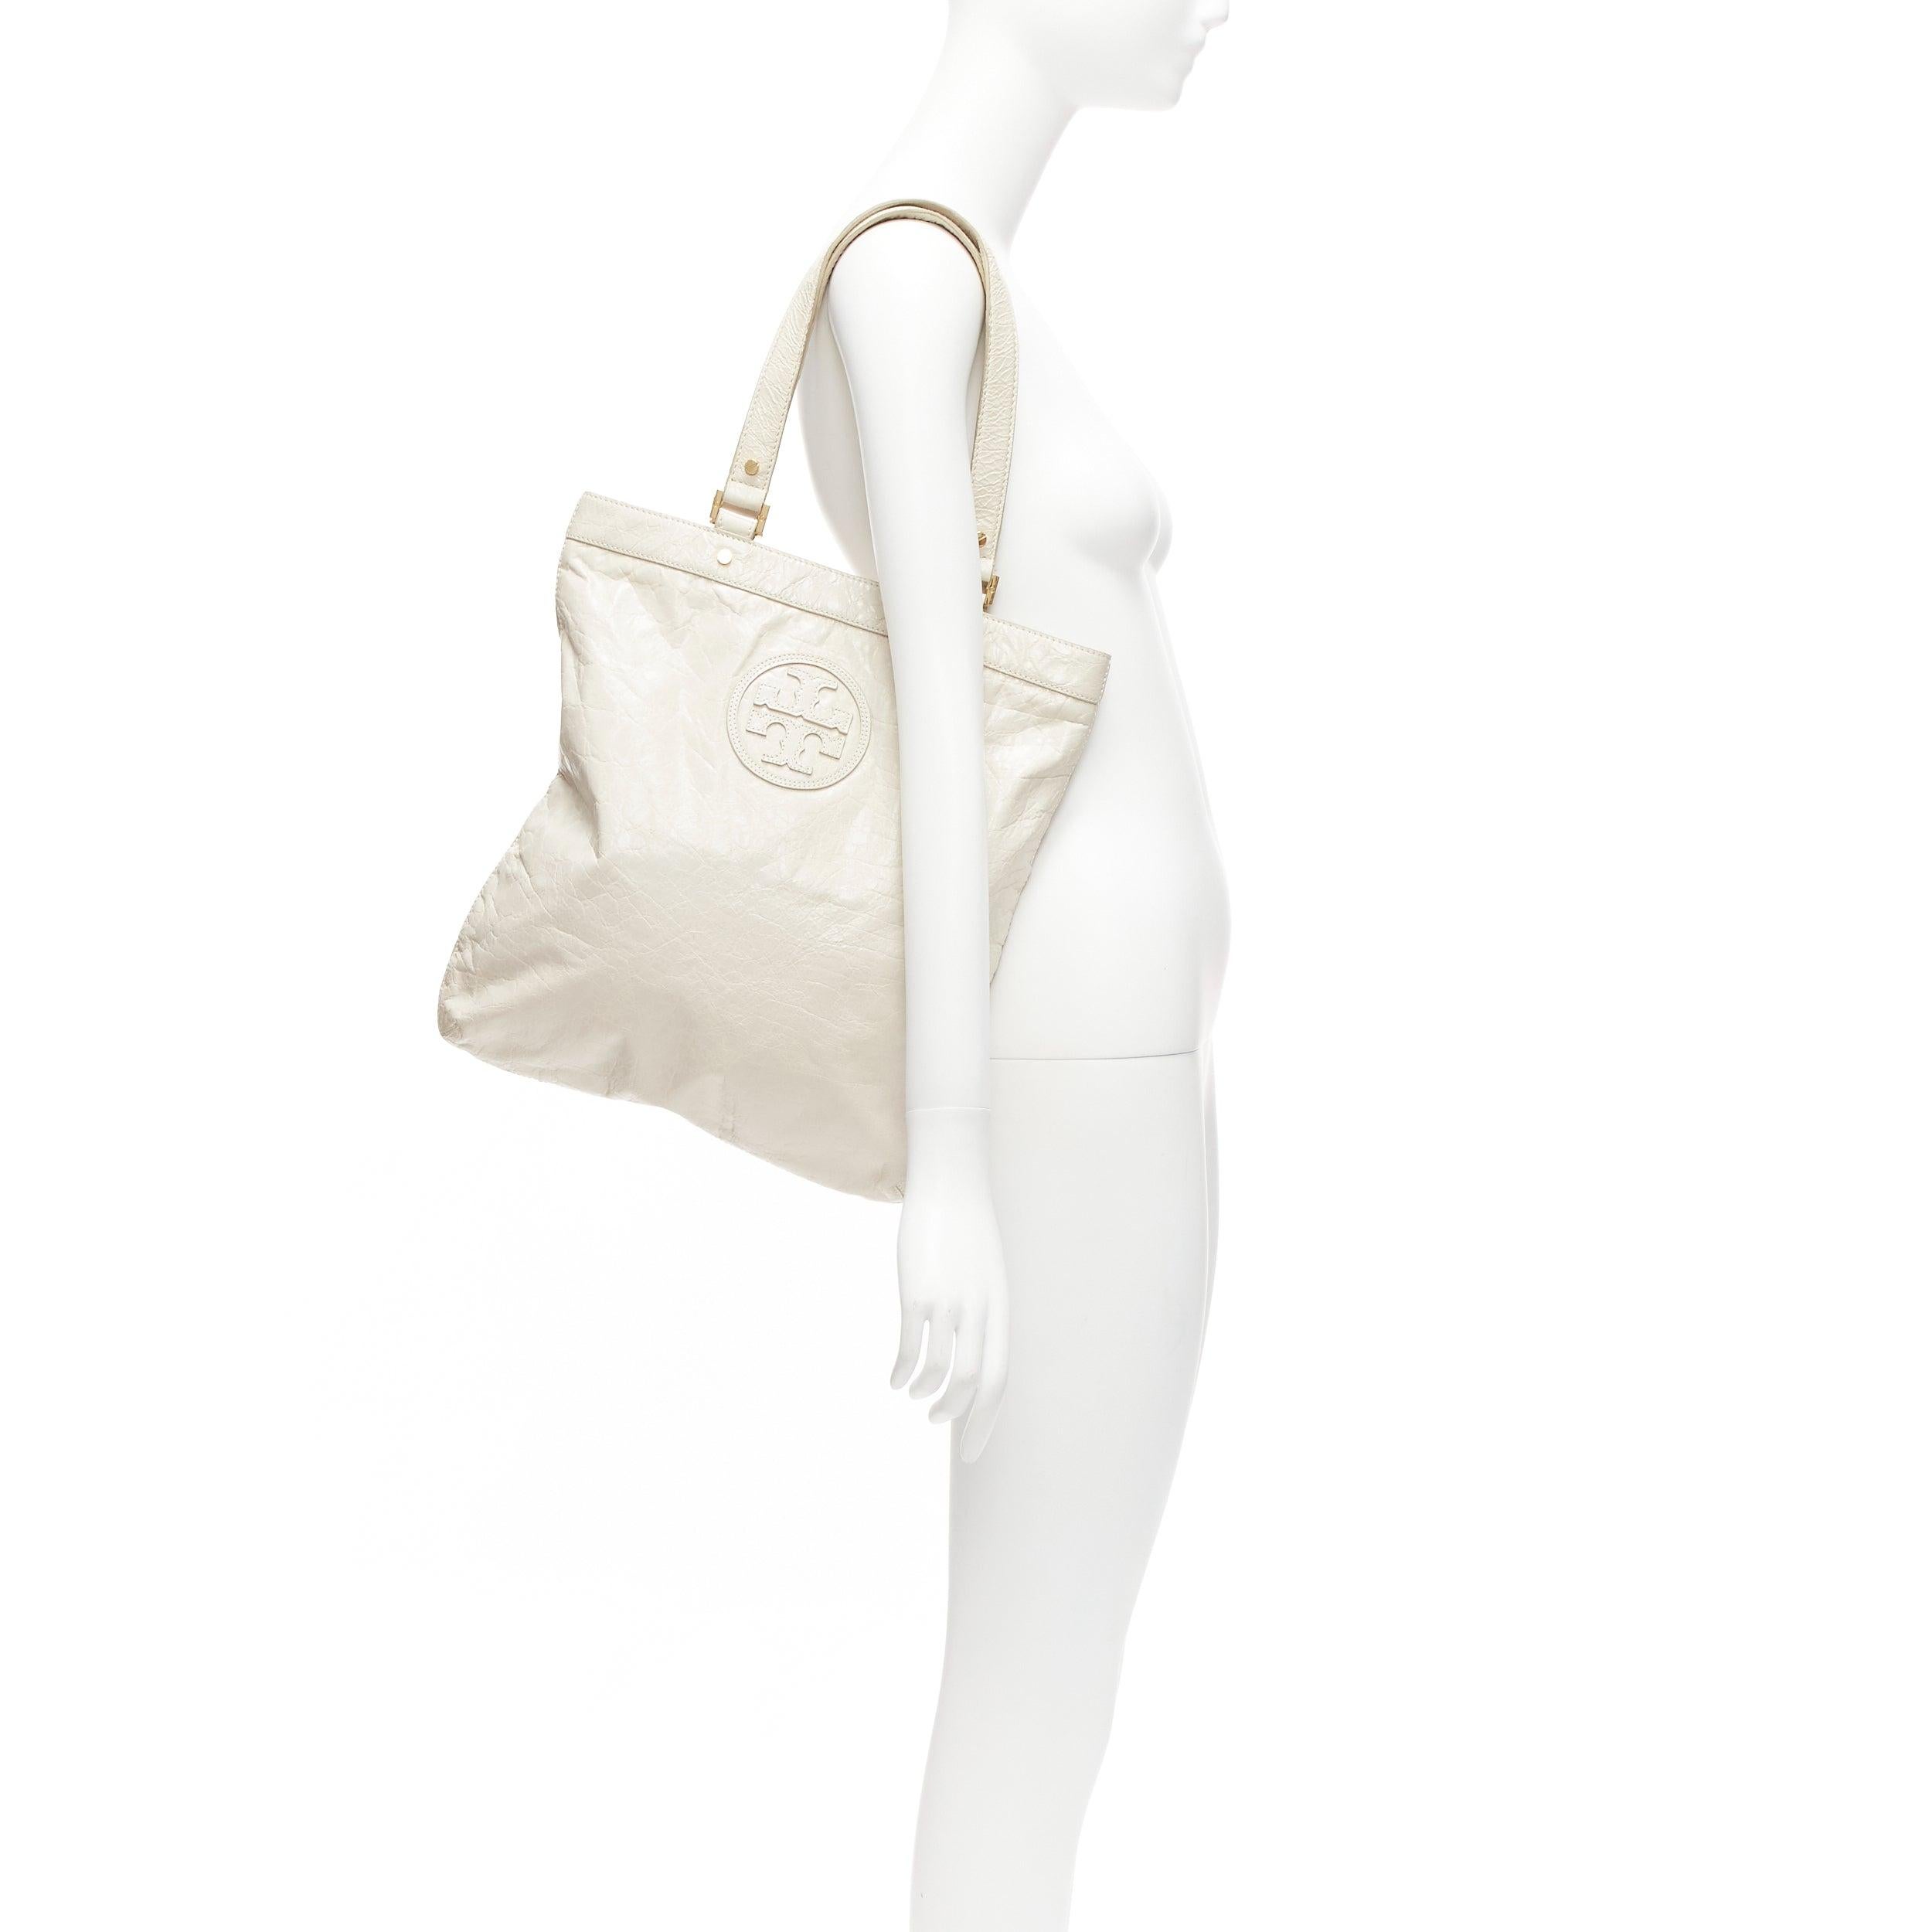 TORY BURCH white textured leather logo patch gold hardware A4 tote bag
Reference: CELG/A00404
Brand: Tory Burch
Material: Leather
Color: White, Gold
Pattern: Solid
Closure: Snap Buttons
Lining: Beige Fabric

CONDITION:
Condition: Very good, this